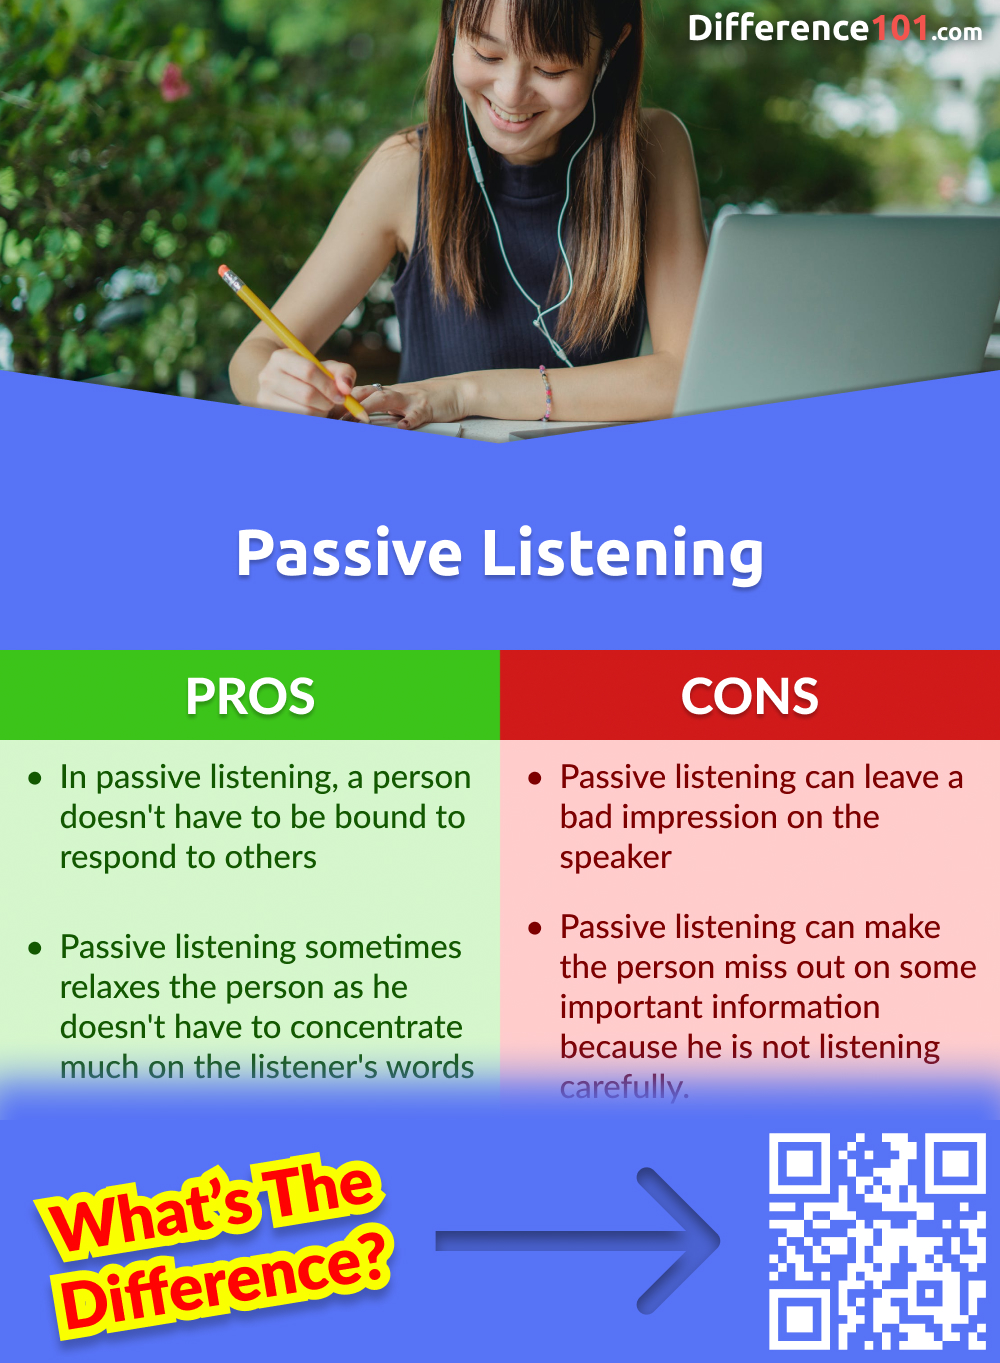 Passive Listening Pros and Cons